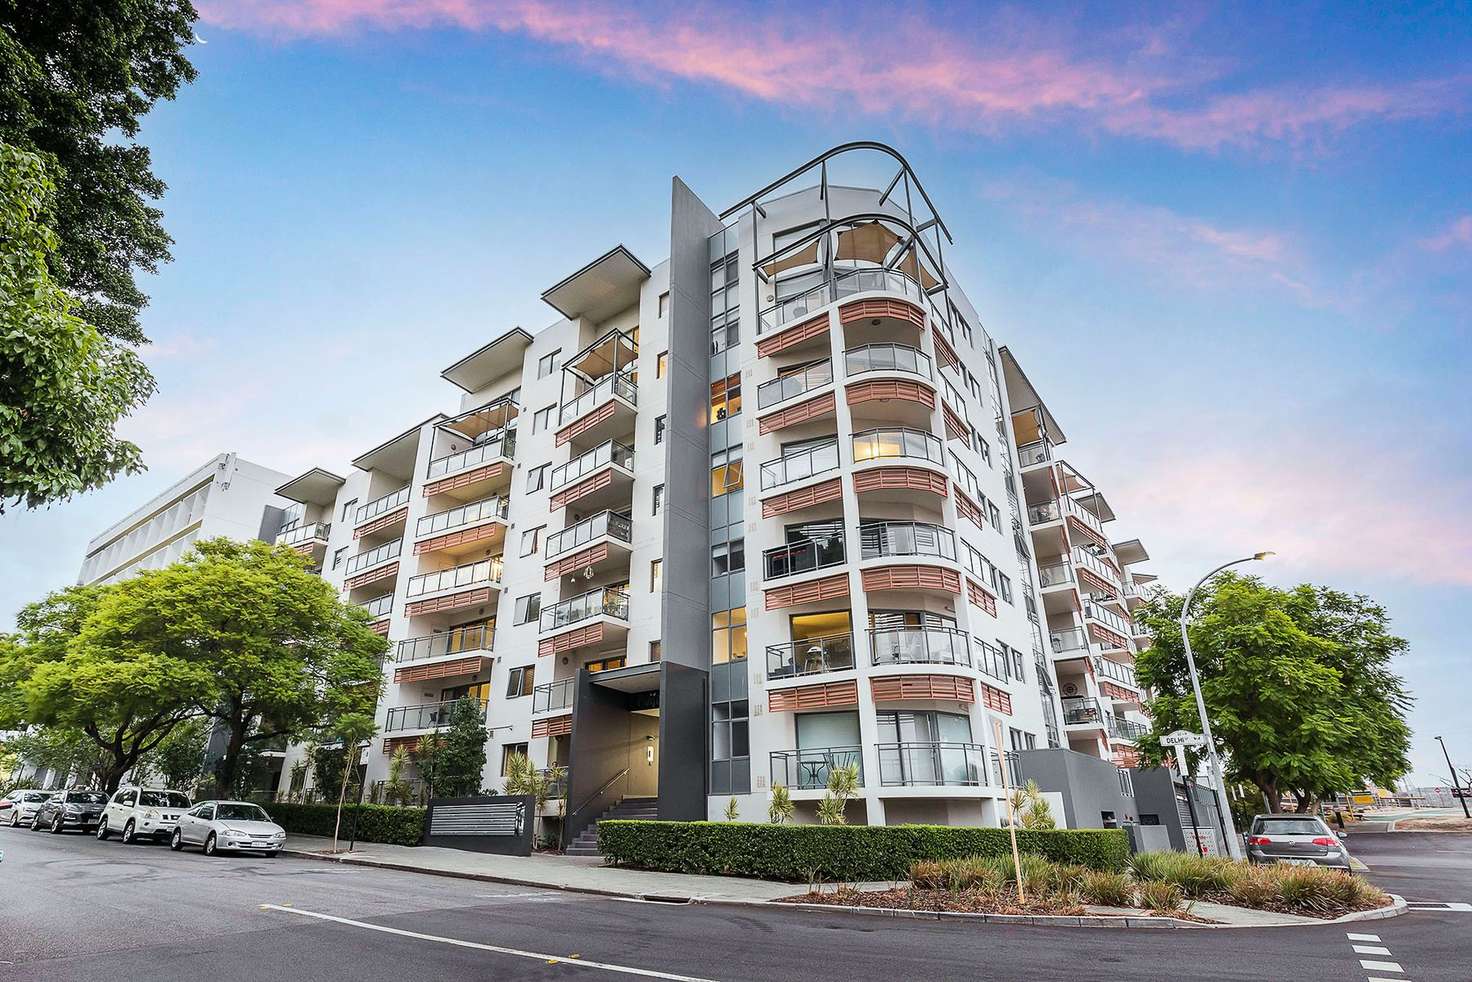 Main view of Homely apartment listing, 63/4 Delhi Street, West Perth WA 6005